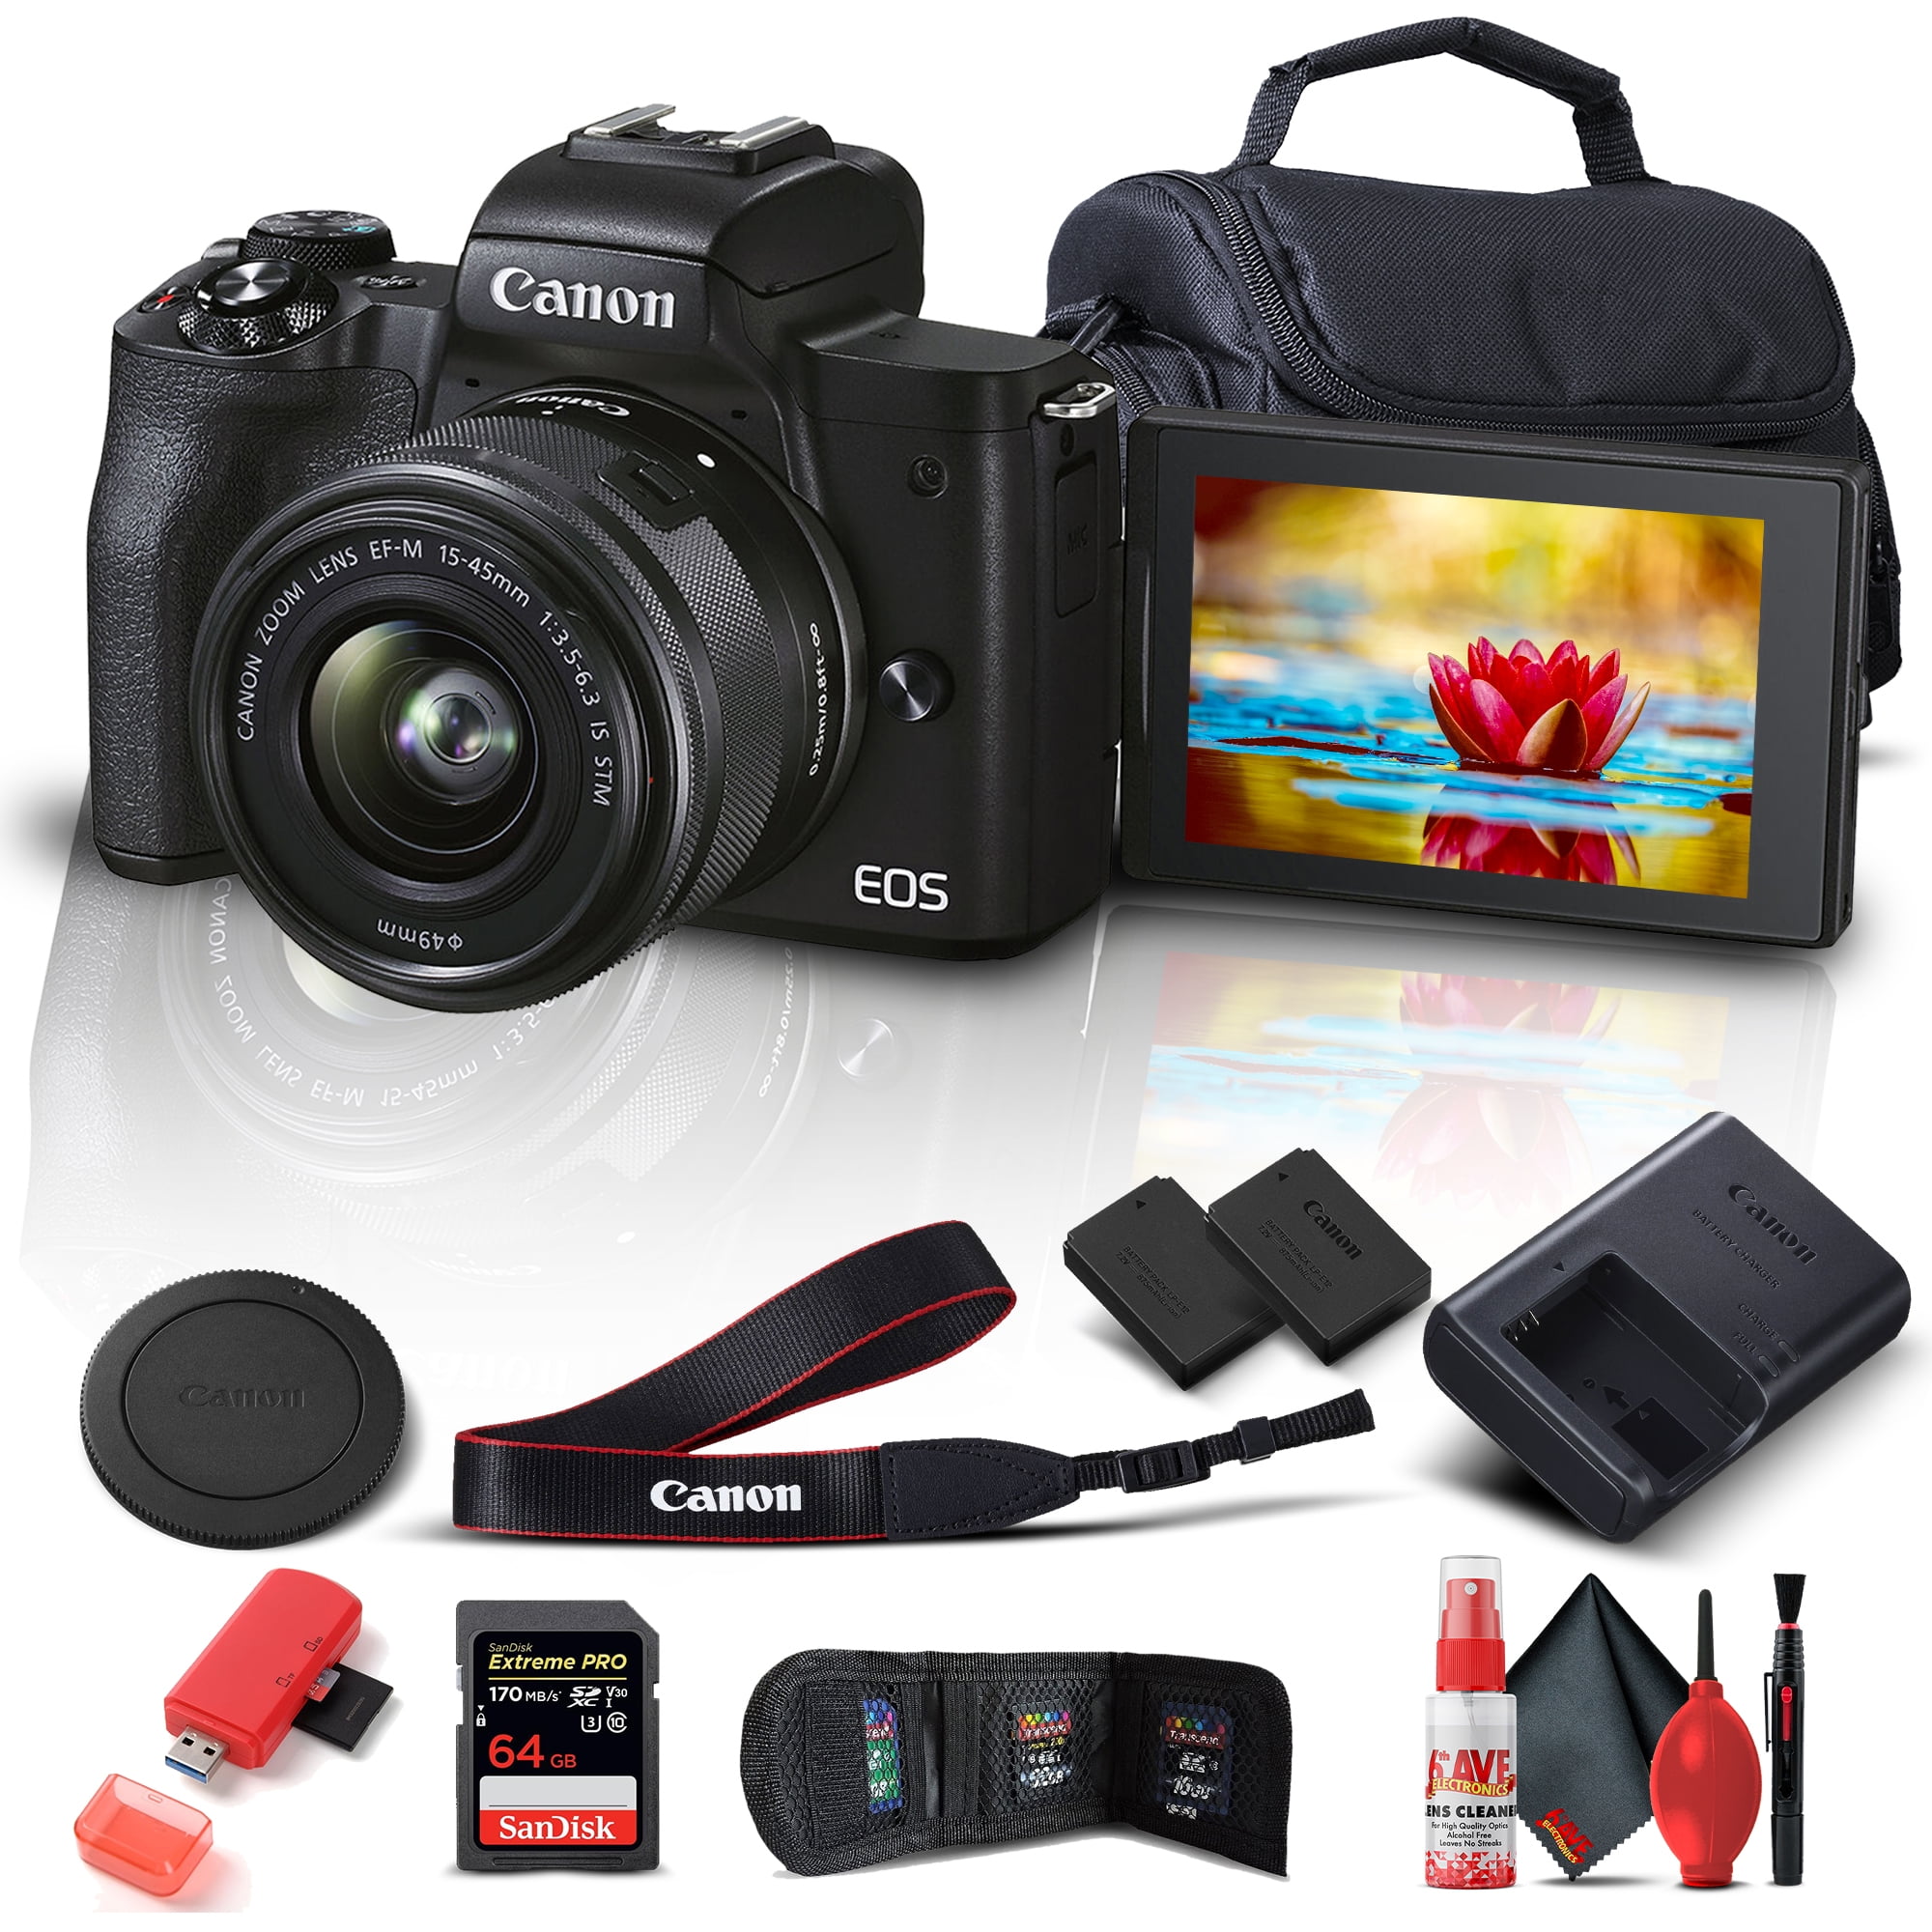 som martelen cafetaria Canon EOS M50 Mark II Mirrorless Digital Camera with 15-45mm Lens (Black)  (4728C006) + 64GB Extreme Pro Card + Extra LPE12 Battery + Case + Card  Reader + Deluxe Cleaning Set + Memory Wallet + More - Walmart.com